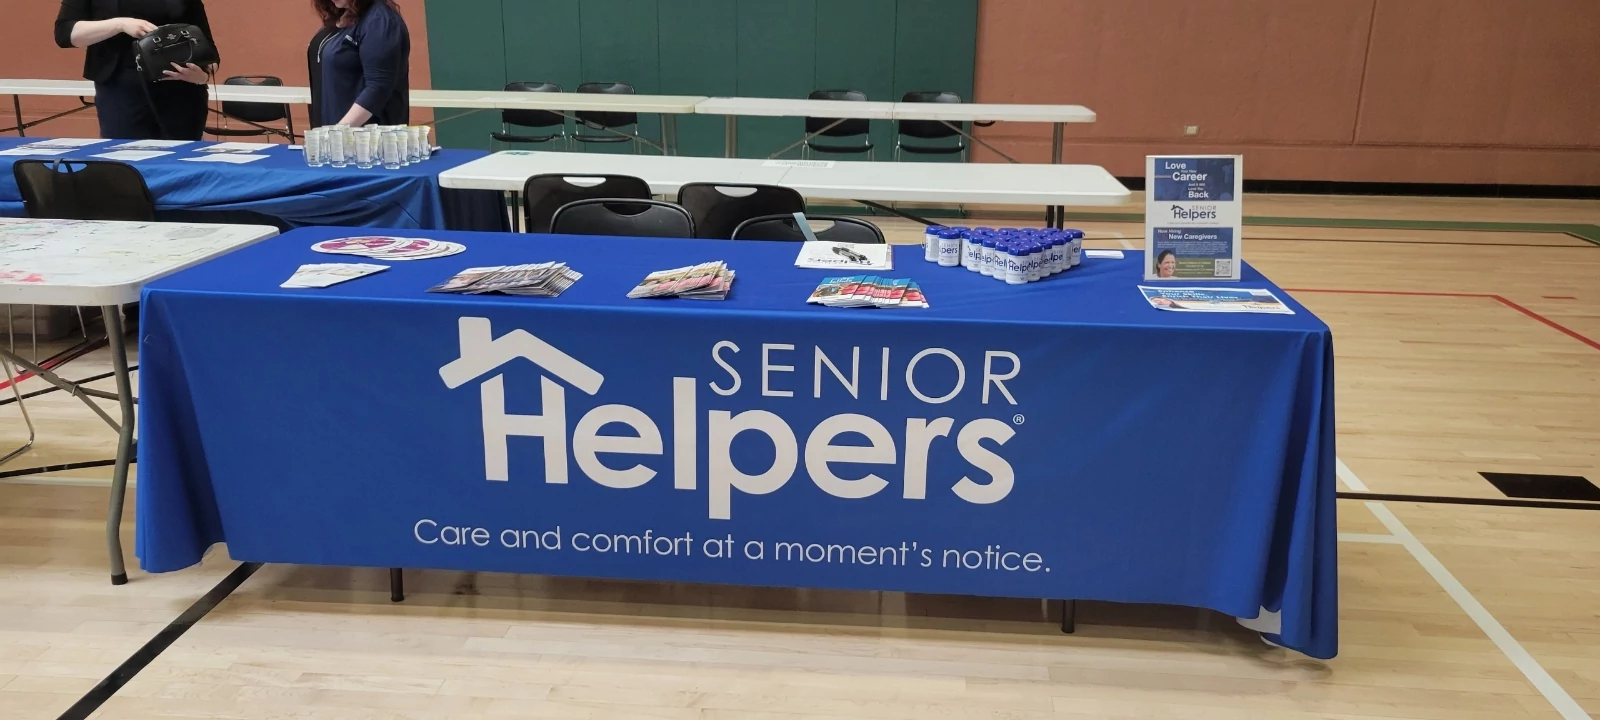 We were thrilled to participate in this year’s Englewood Active Aging Expo at the Malley Recreation Center!